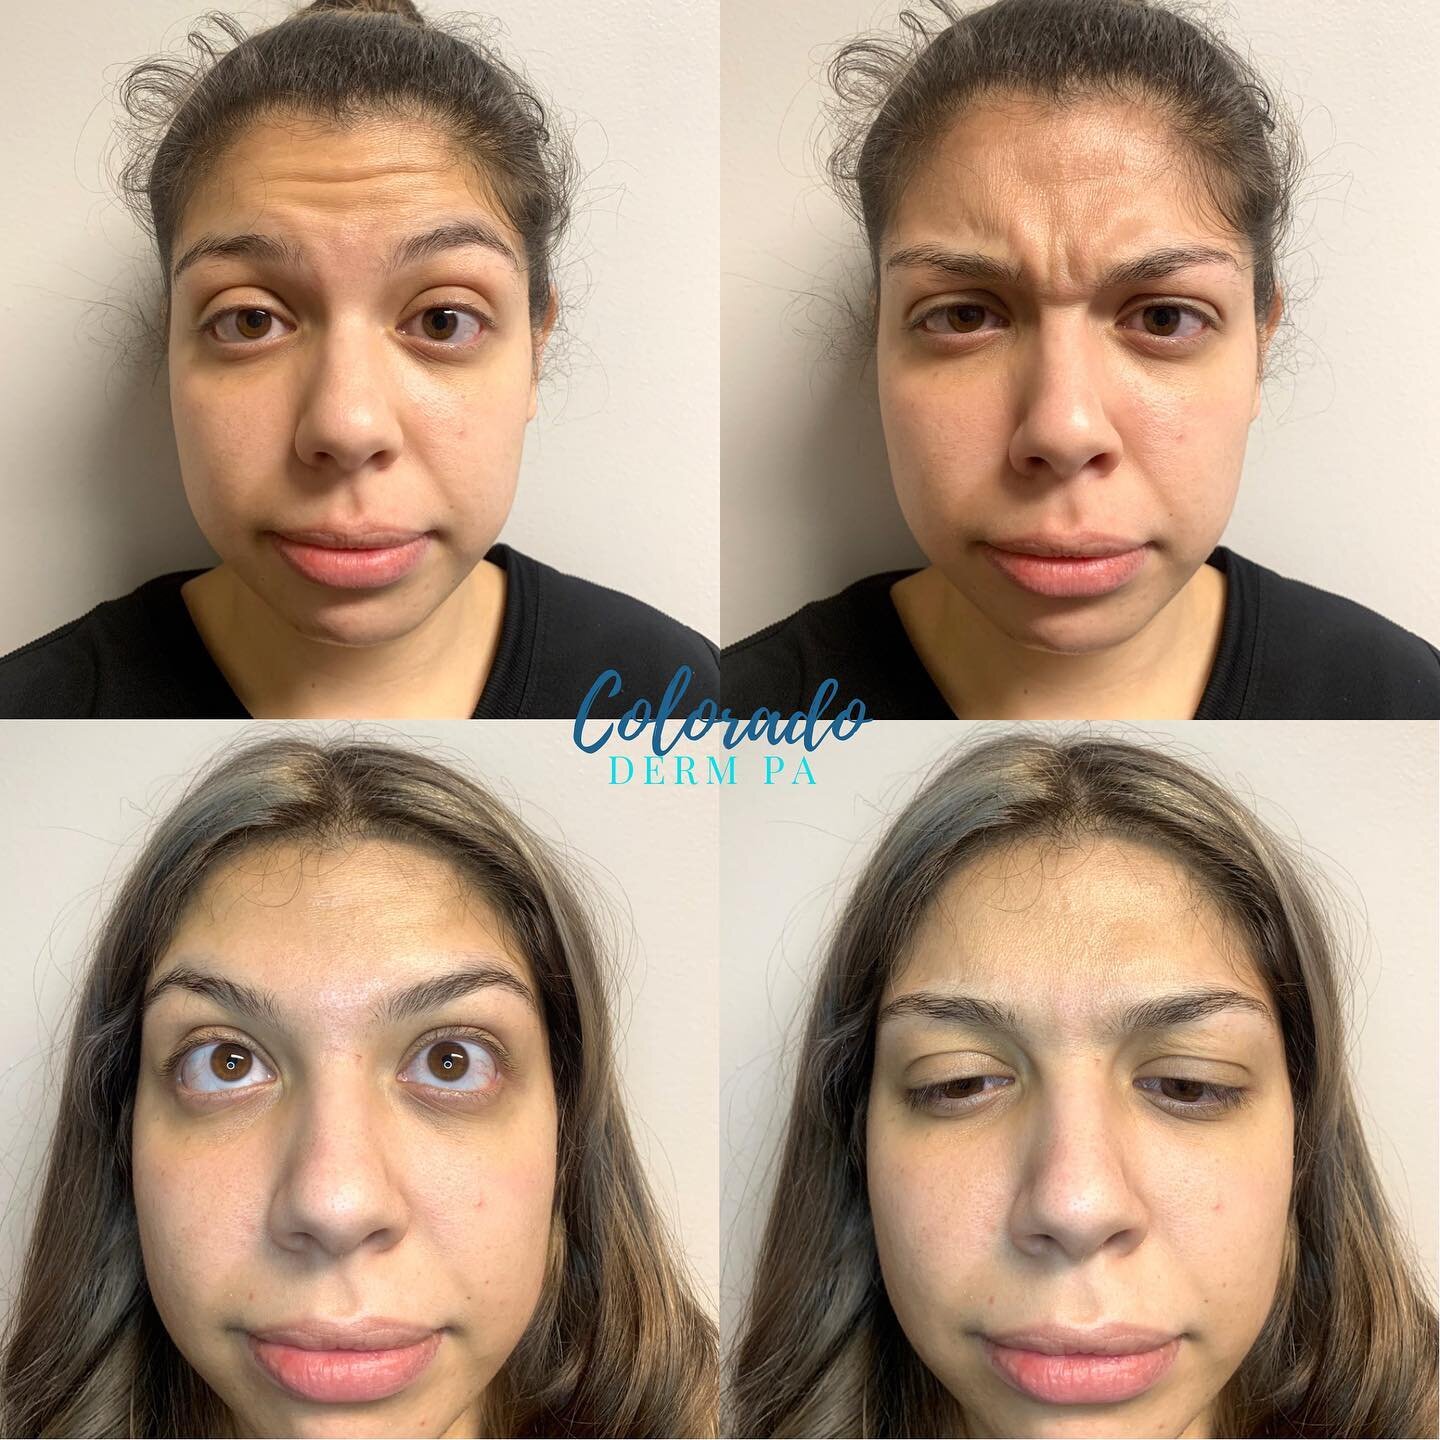 Loving this Dysport B&amp;A for this lovely bride-to-be ⁣
⁣
Photos taken 2 weeks apart. Duration of dysport is typically around 4 months. ⁣
⁣
Interested in Dysport? Come see me at my office! ⁣
⁣
📍2009 W Littleton Blvd, Suite 100 ⁣
Littleton, CO 8021